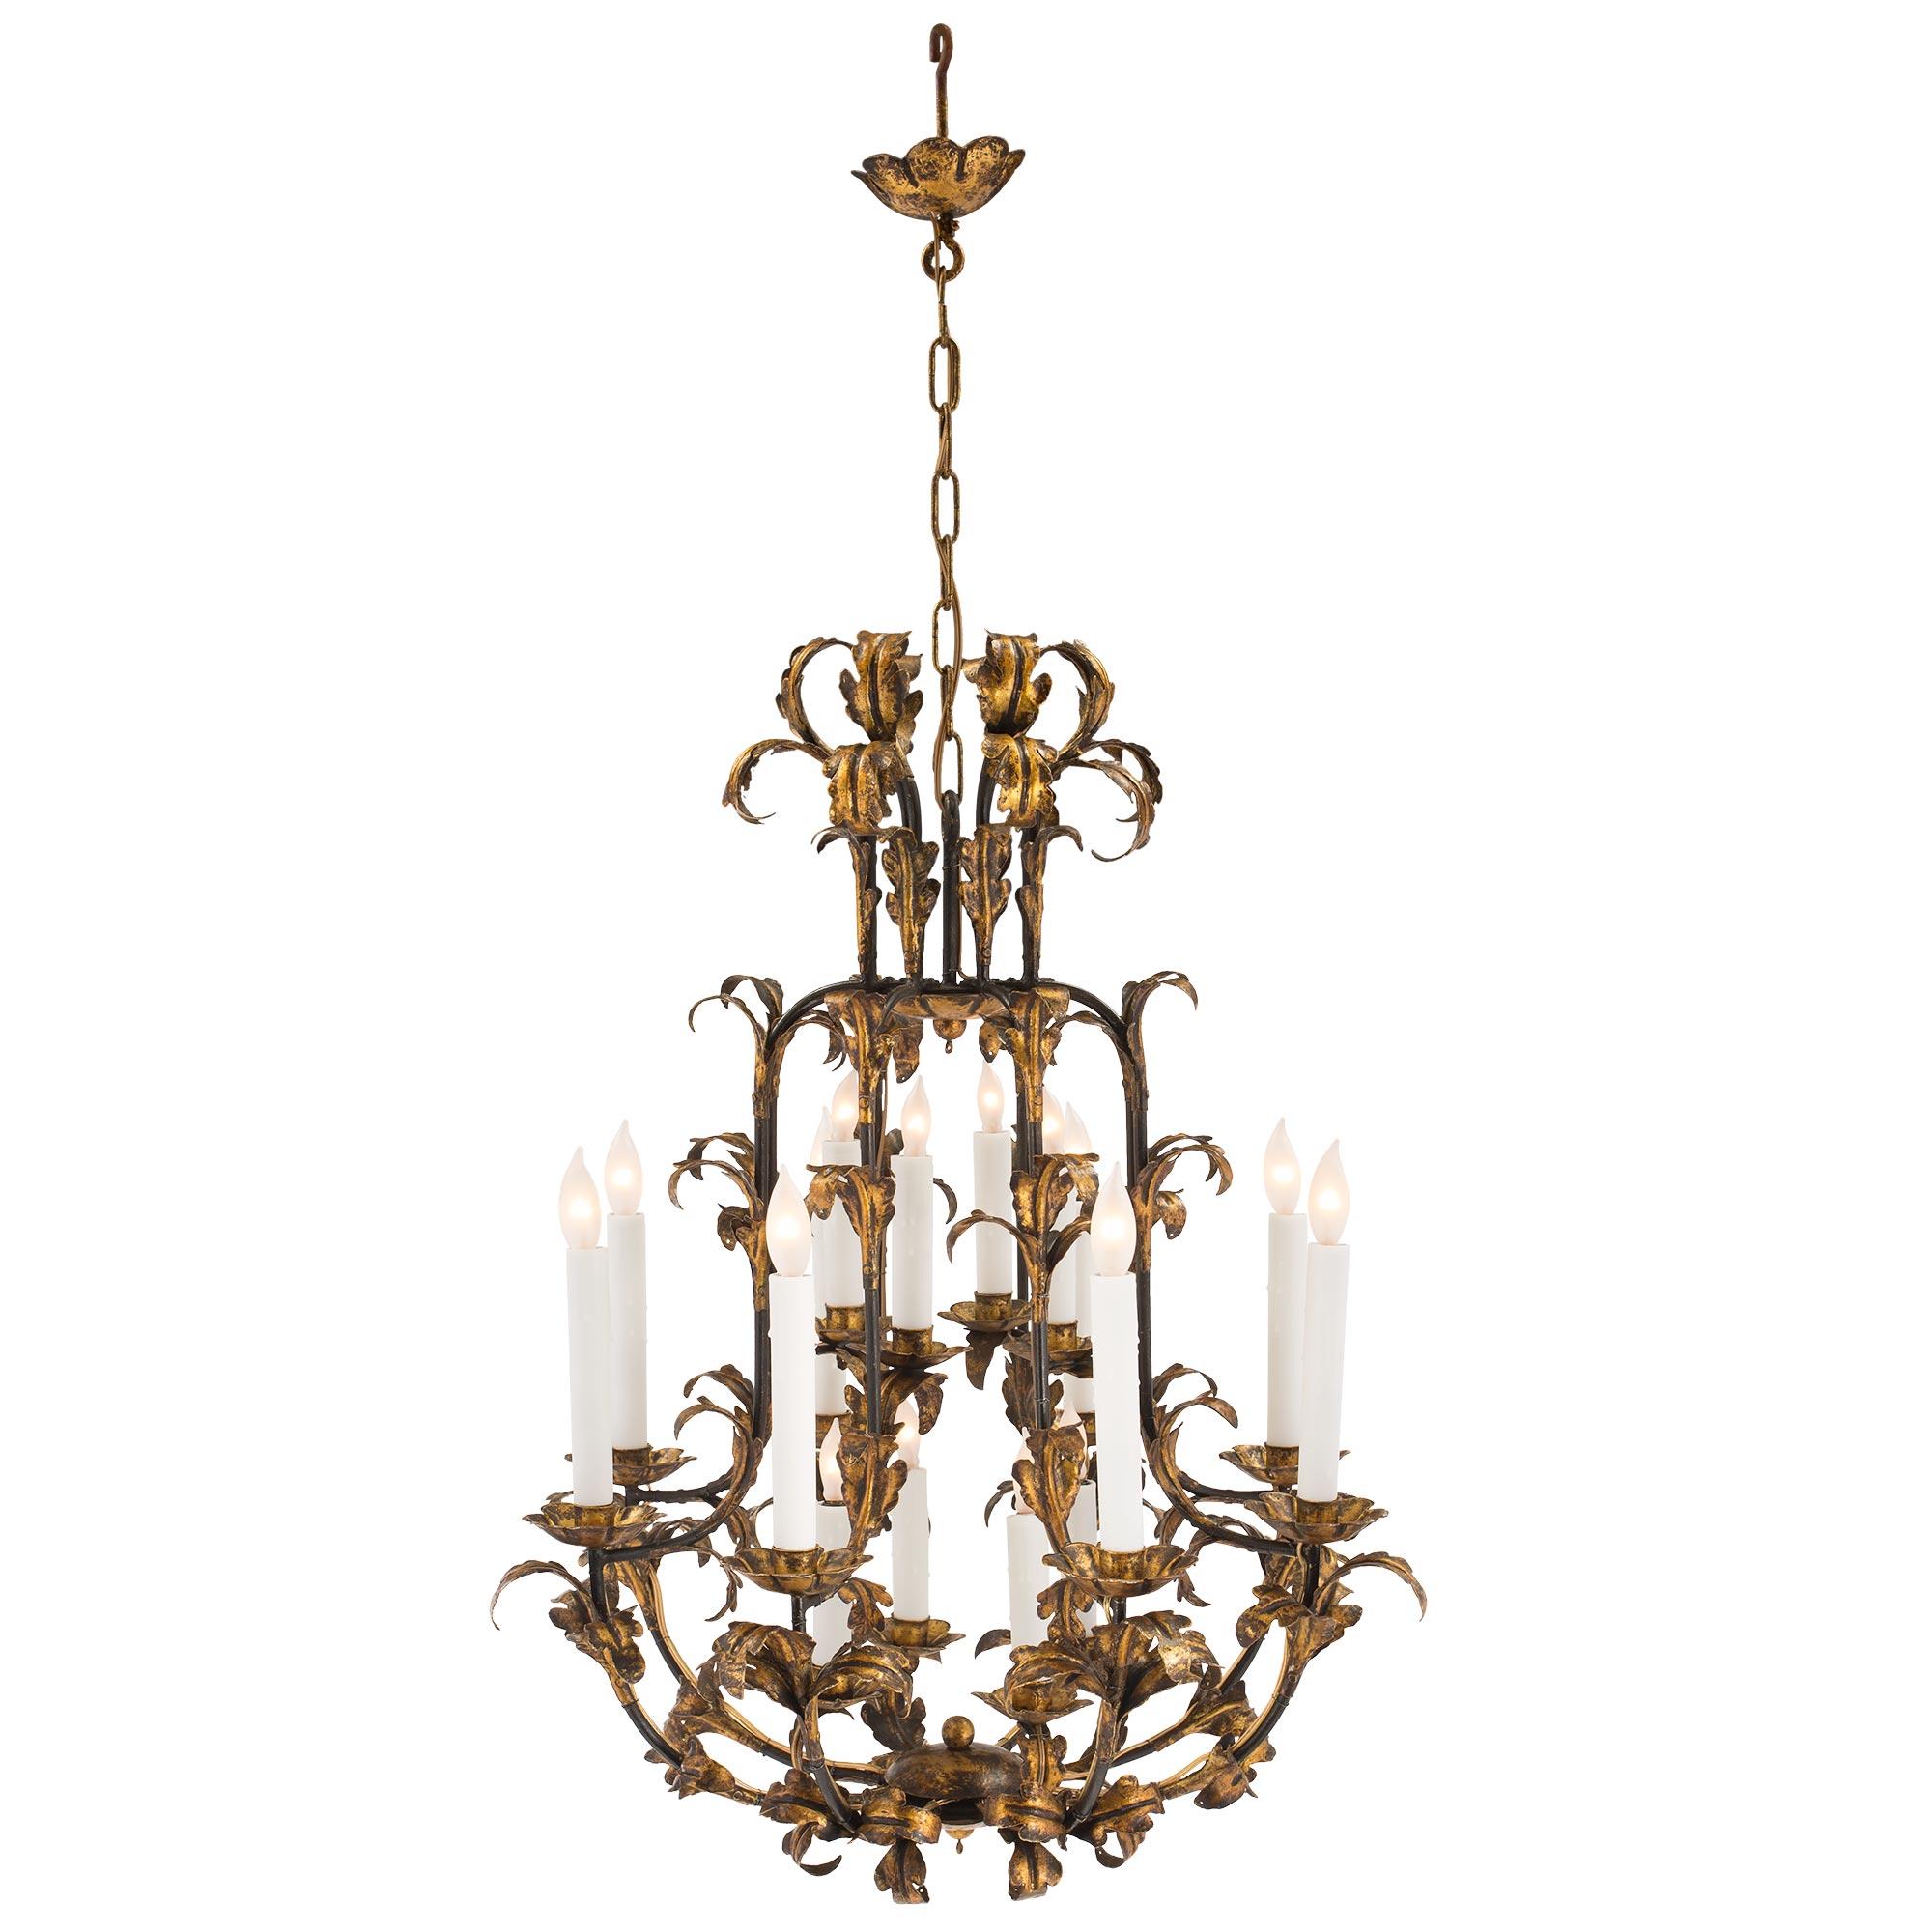 A charming Continental late 19th century Louis XV st. patinated and gilt metal sixteen light chandelier. The chandelier is centered by a bottom foliate reserve from where each of the eight extremely decorative arms branch out. Each arm is decorated